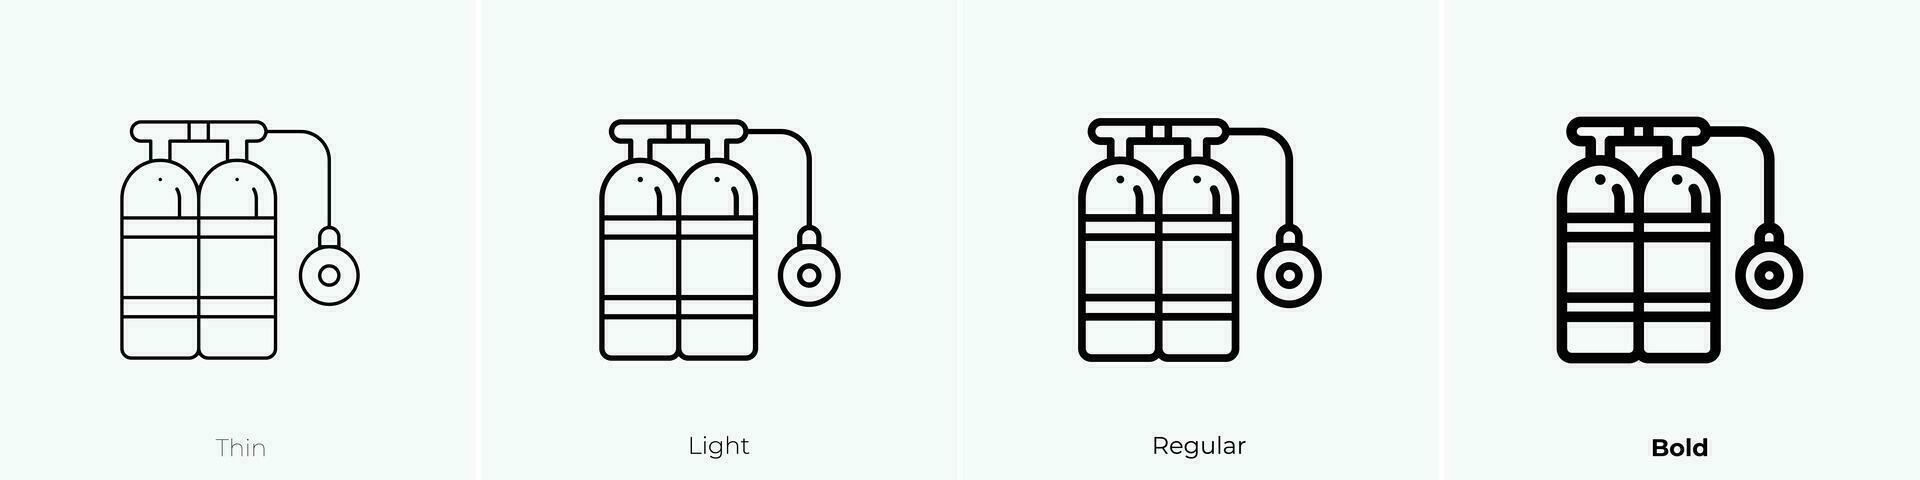 tank icon. Thin, Light, Regular And Bold style design isolated on white background vector